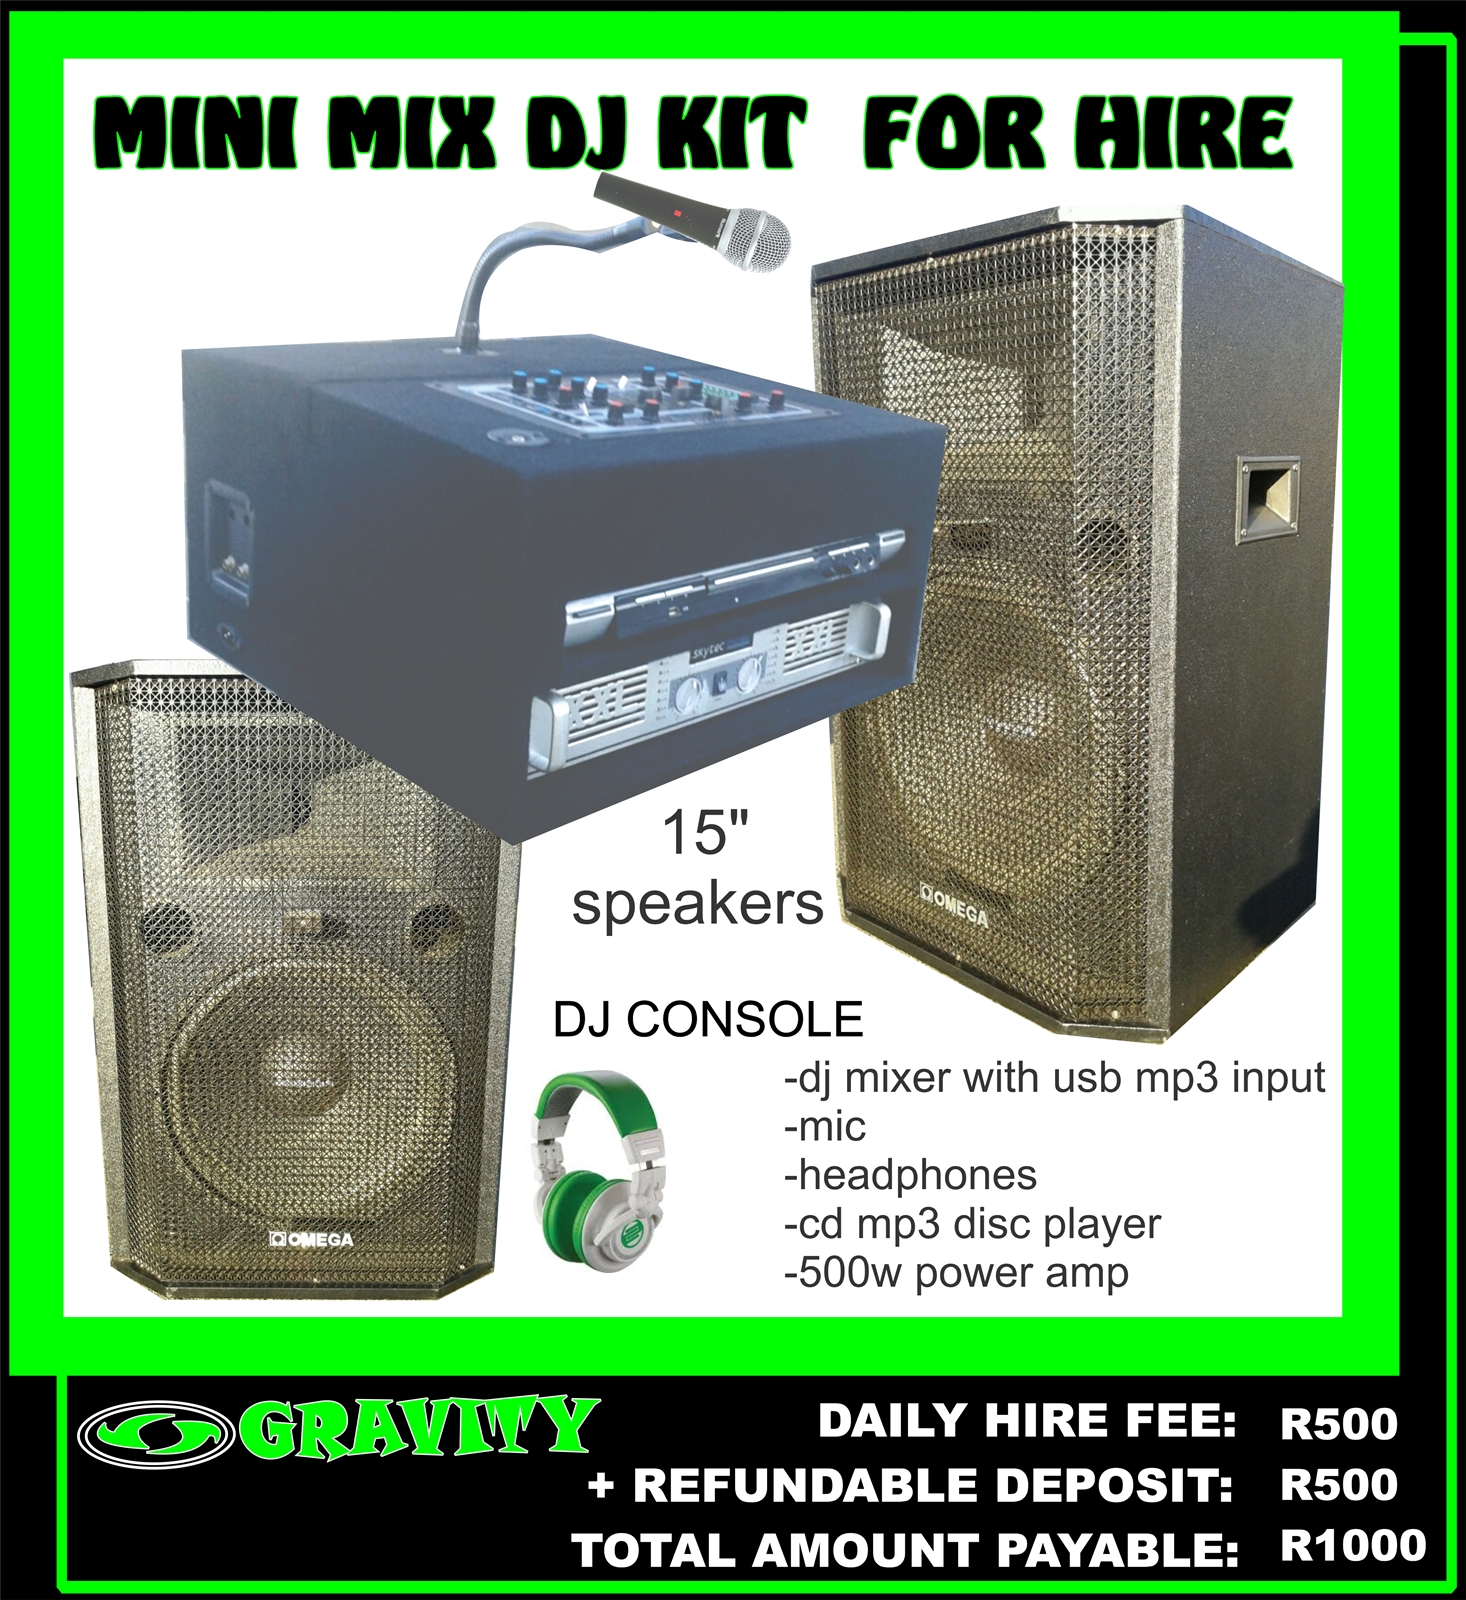 MINI MIX DJ COMBO KIT - DJ EQUIPMENT FOR HIRE IN DURBAN NOW AVAILABLE AT GRAVITY DJ STORE 0315072463  -DJ CONSOLE WITH USB MP3 PLAYBACK   -500W POWER AMPLIFIER  -Dj MIXER WITH USB/SD MP3 PLAYBACK  -CD MP3 DISC PLAYER  -2 x 15